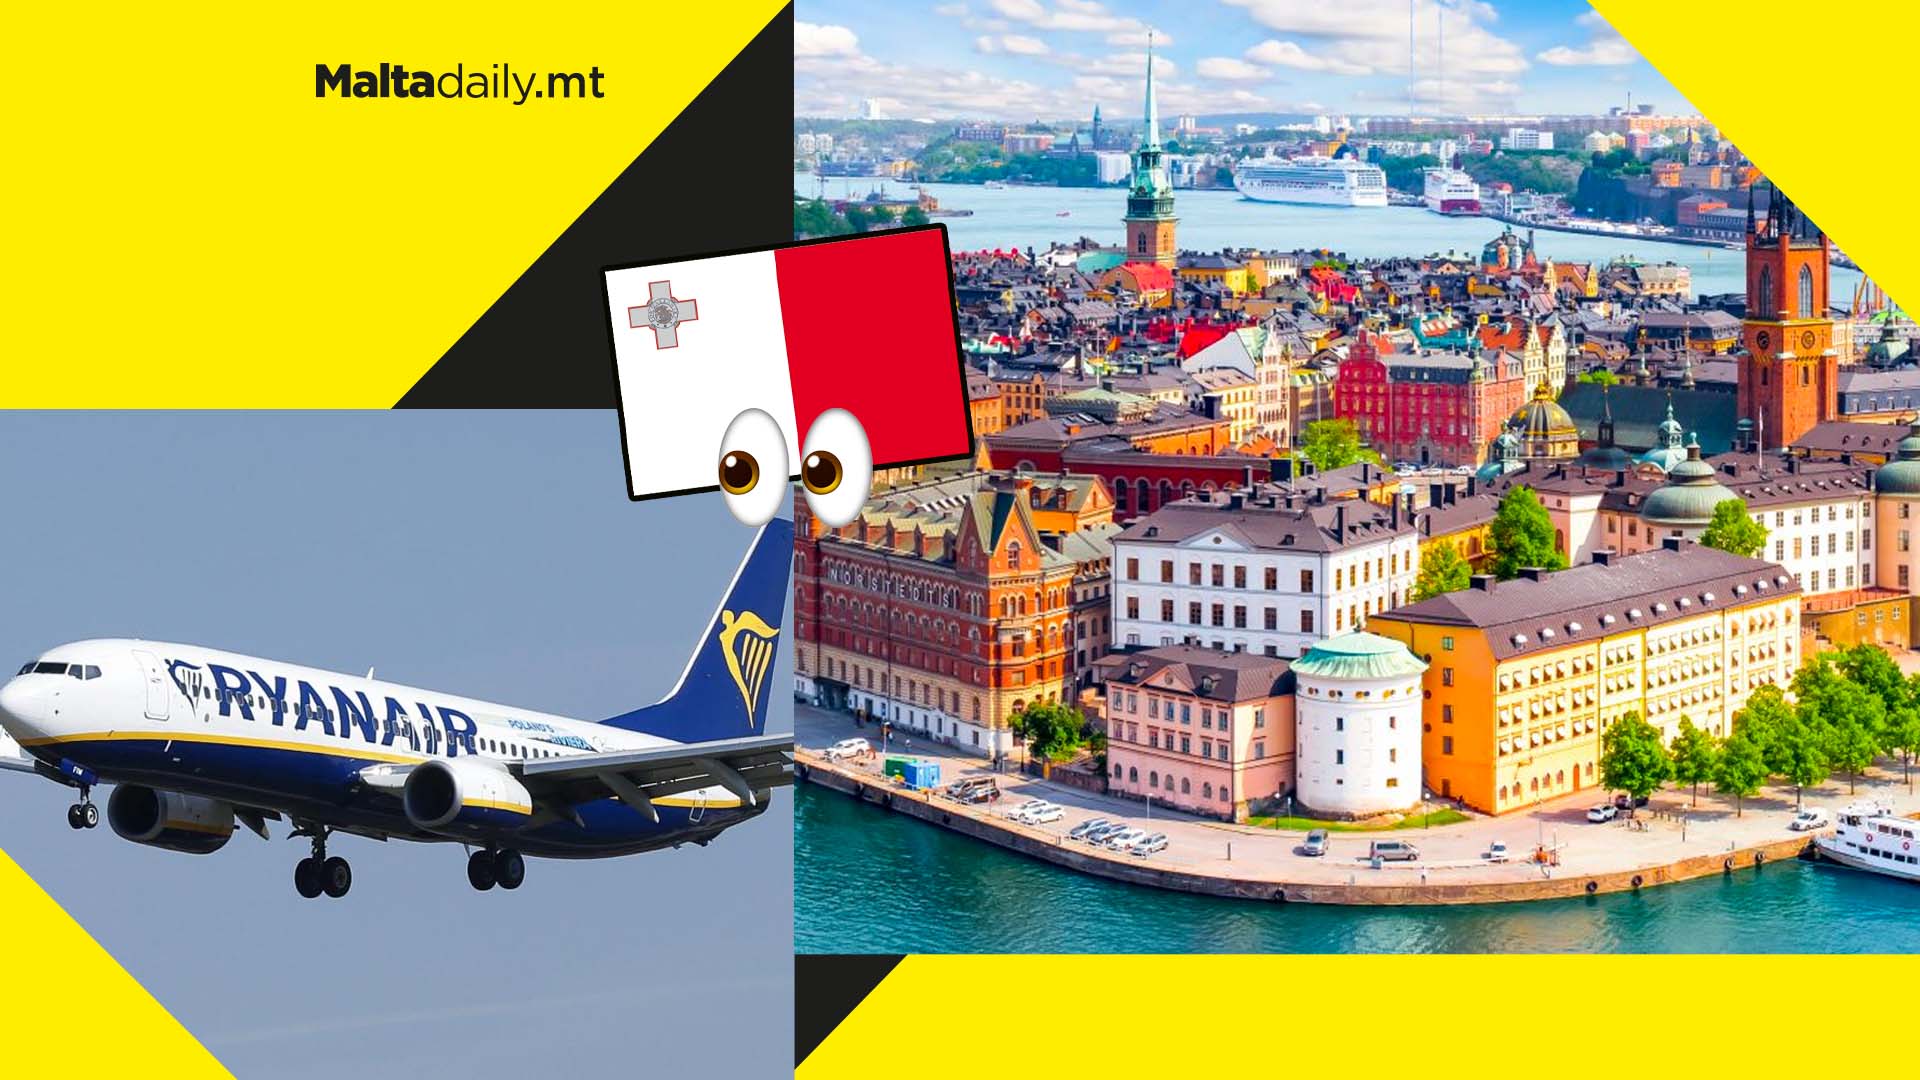 Ryanair adds 5 brand new routes to Malta